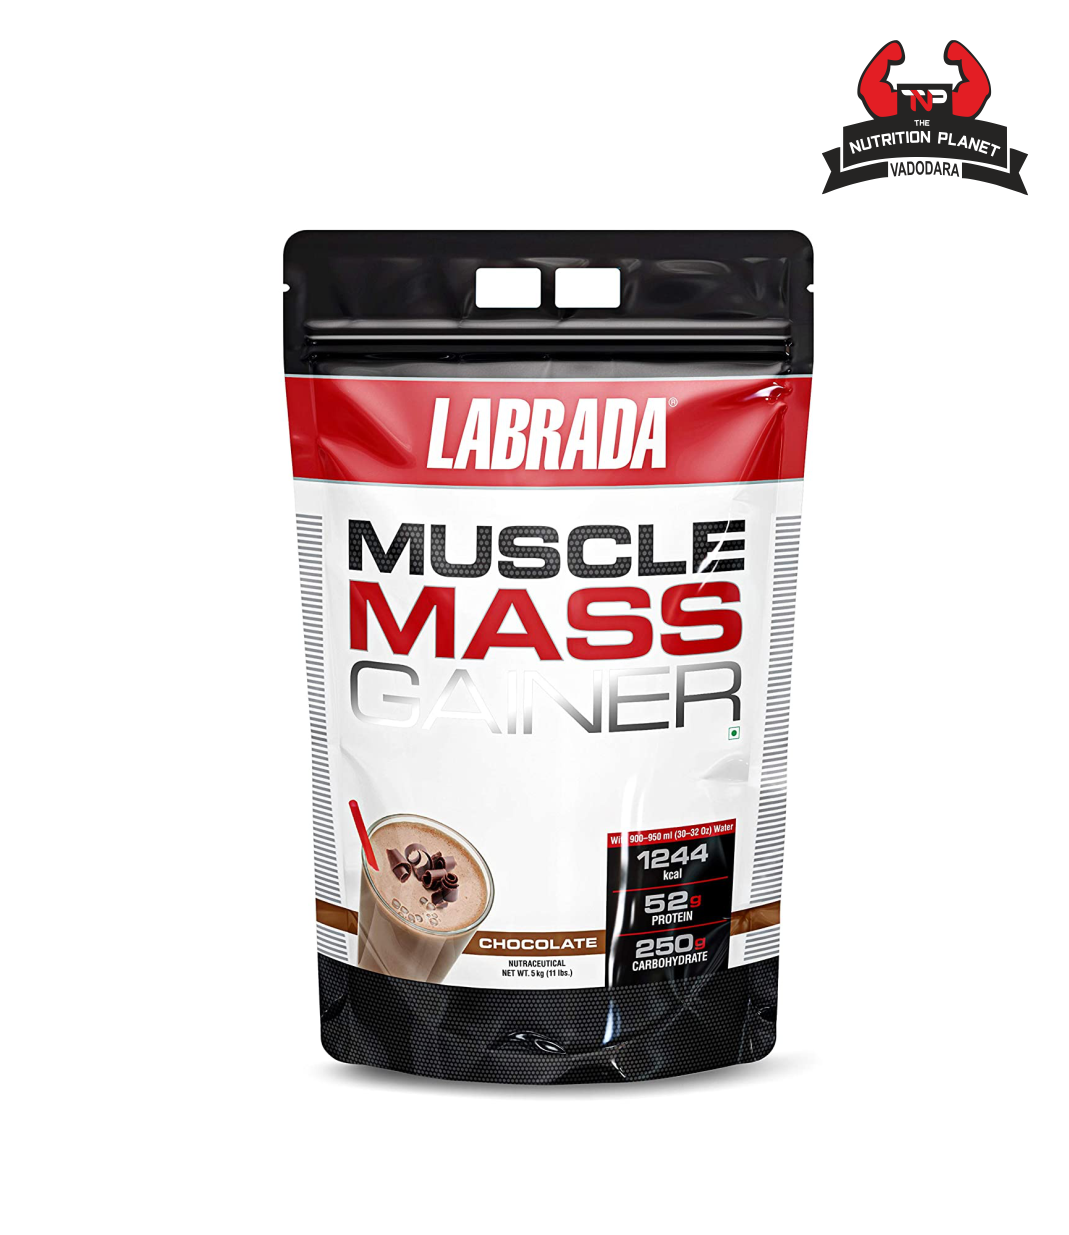 Labrada Muscle Mass Gainer Powder Weight, Post-Workout, 52g Protein, 250g Carbs, 1g Creatine, 500mg L-Carnitine with official authentic tag